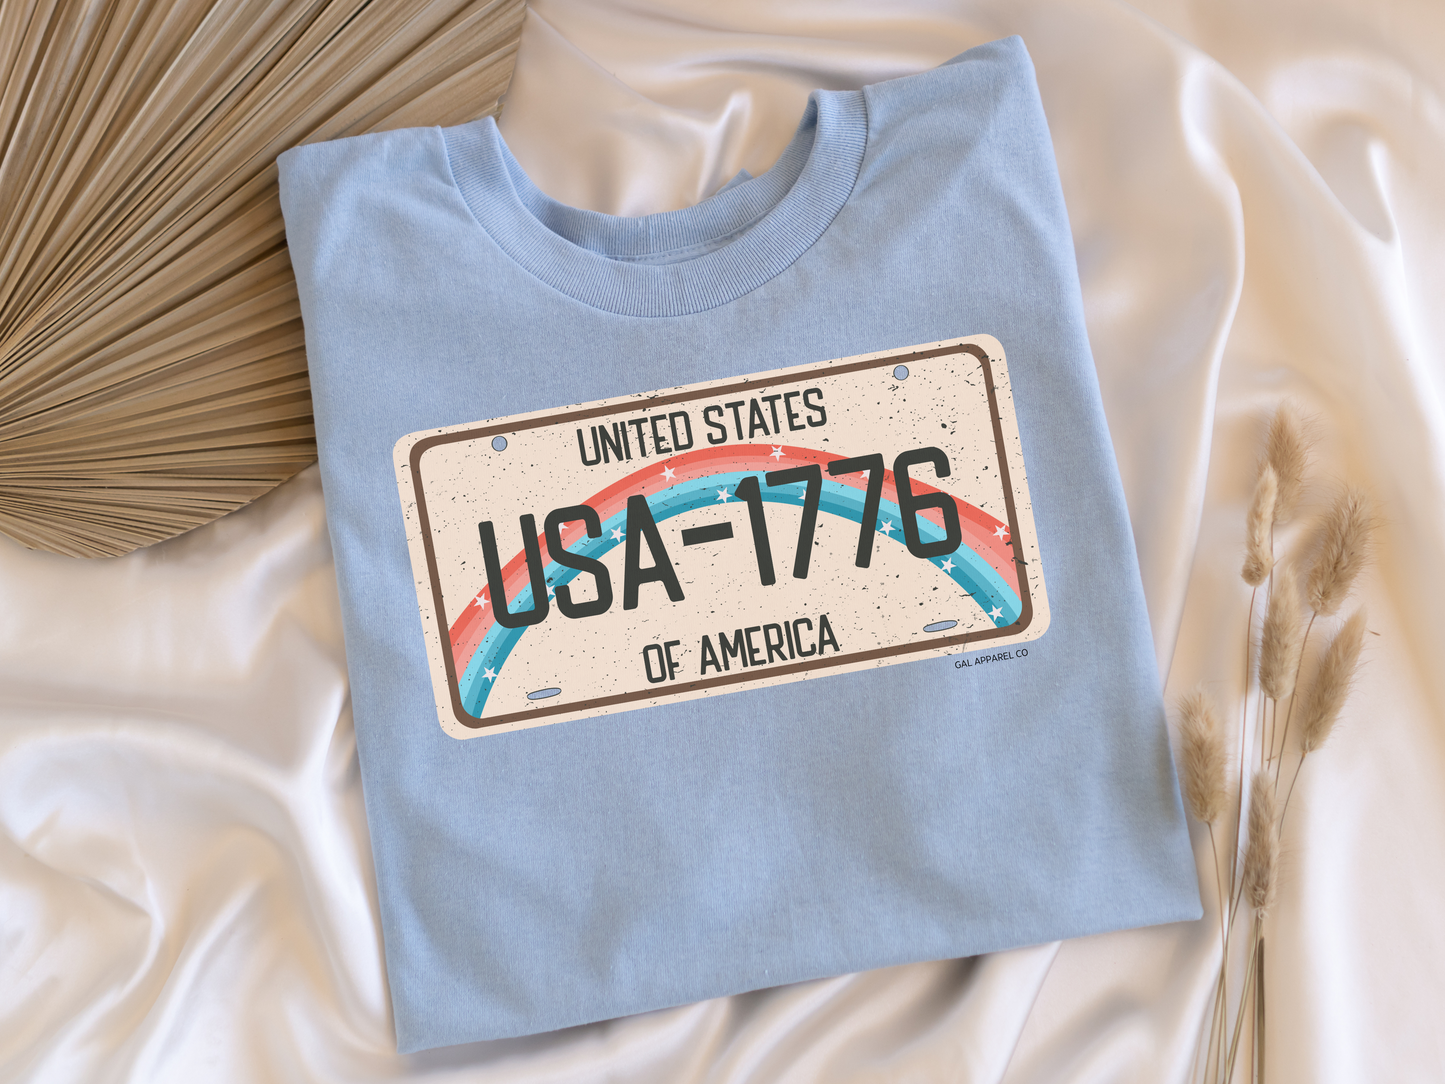 America 1776 license plate design (front of shirt)